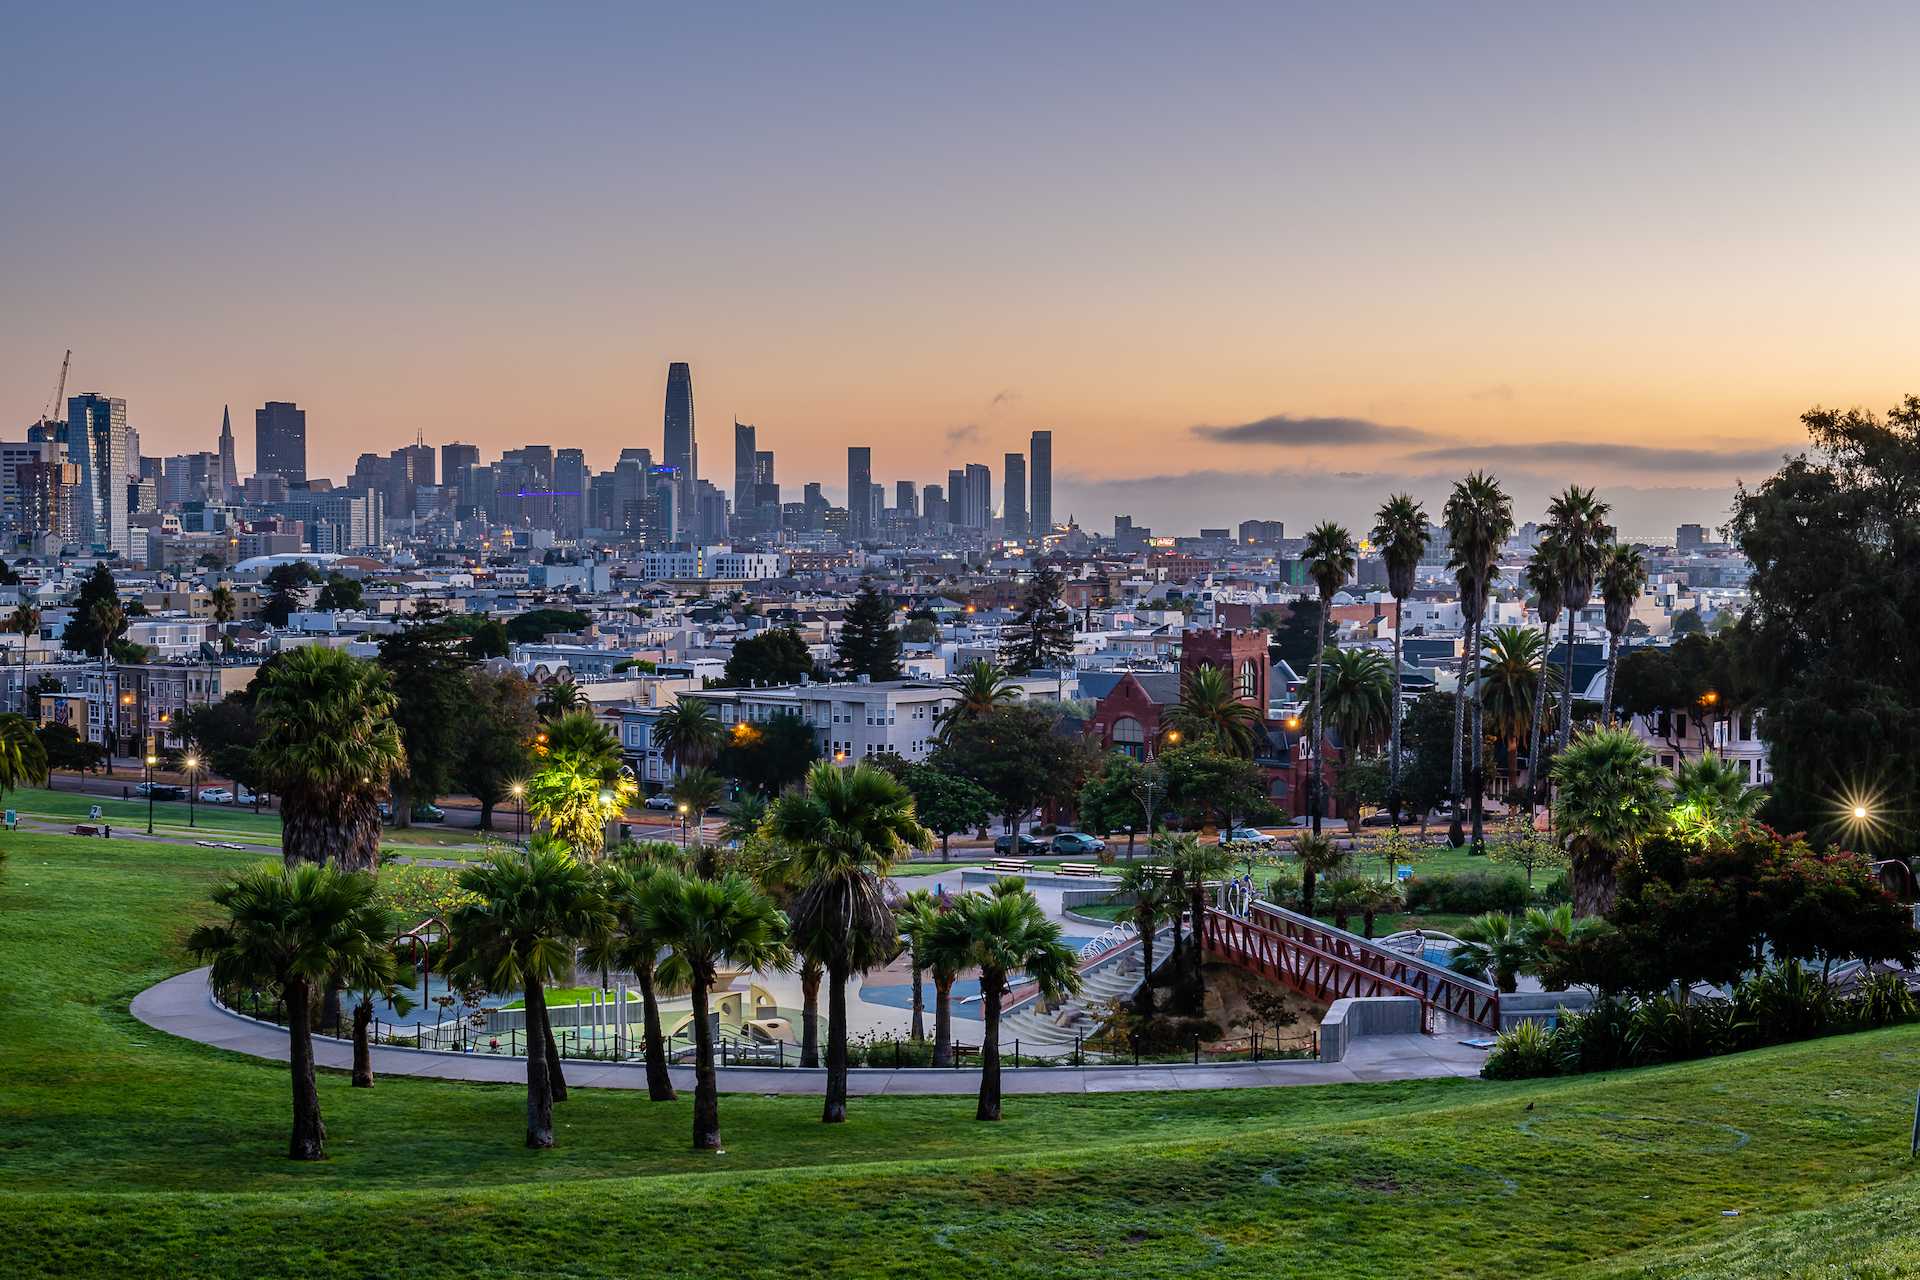 A view of San Francisco from Dolores Park